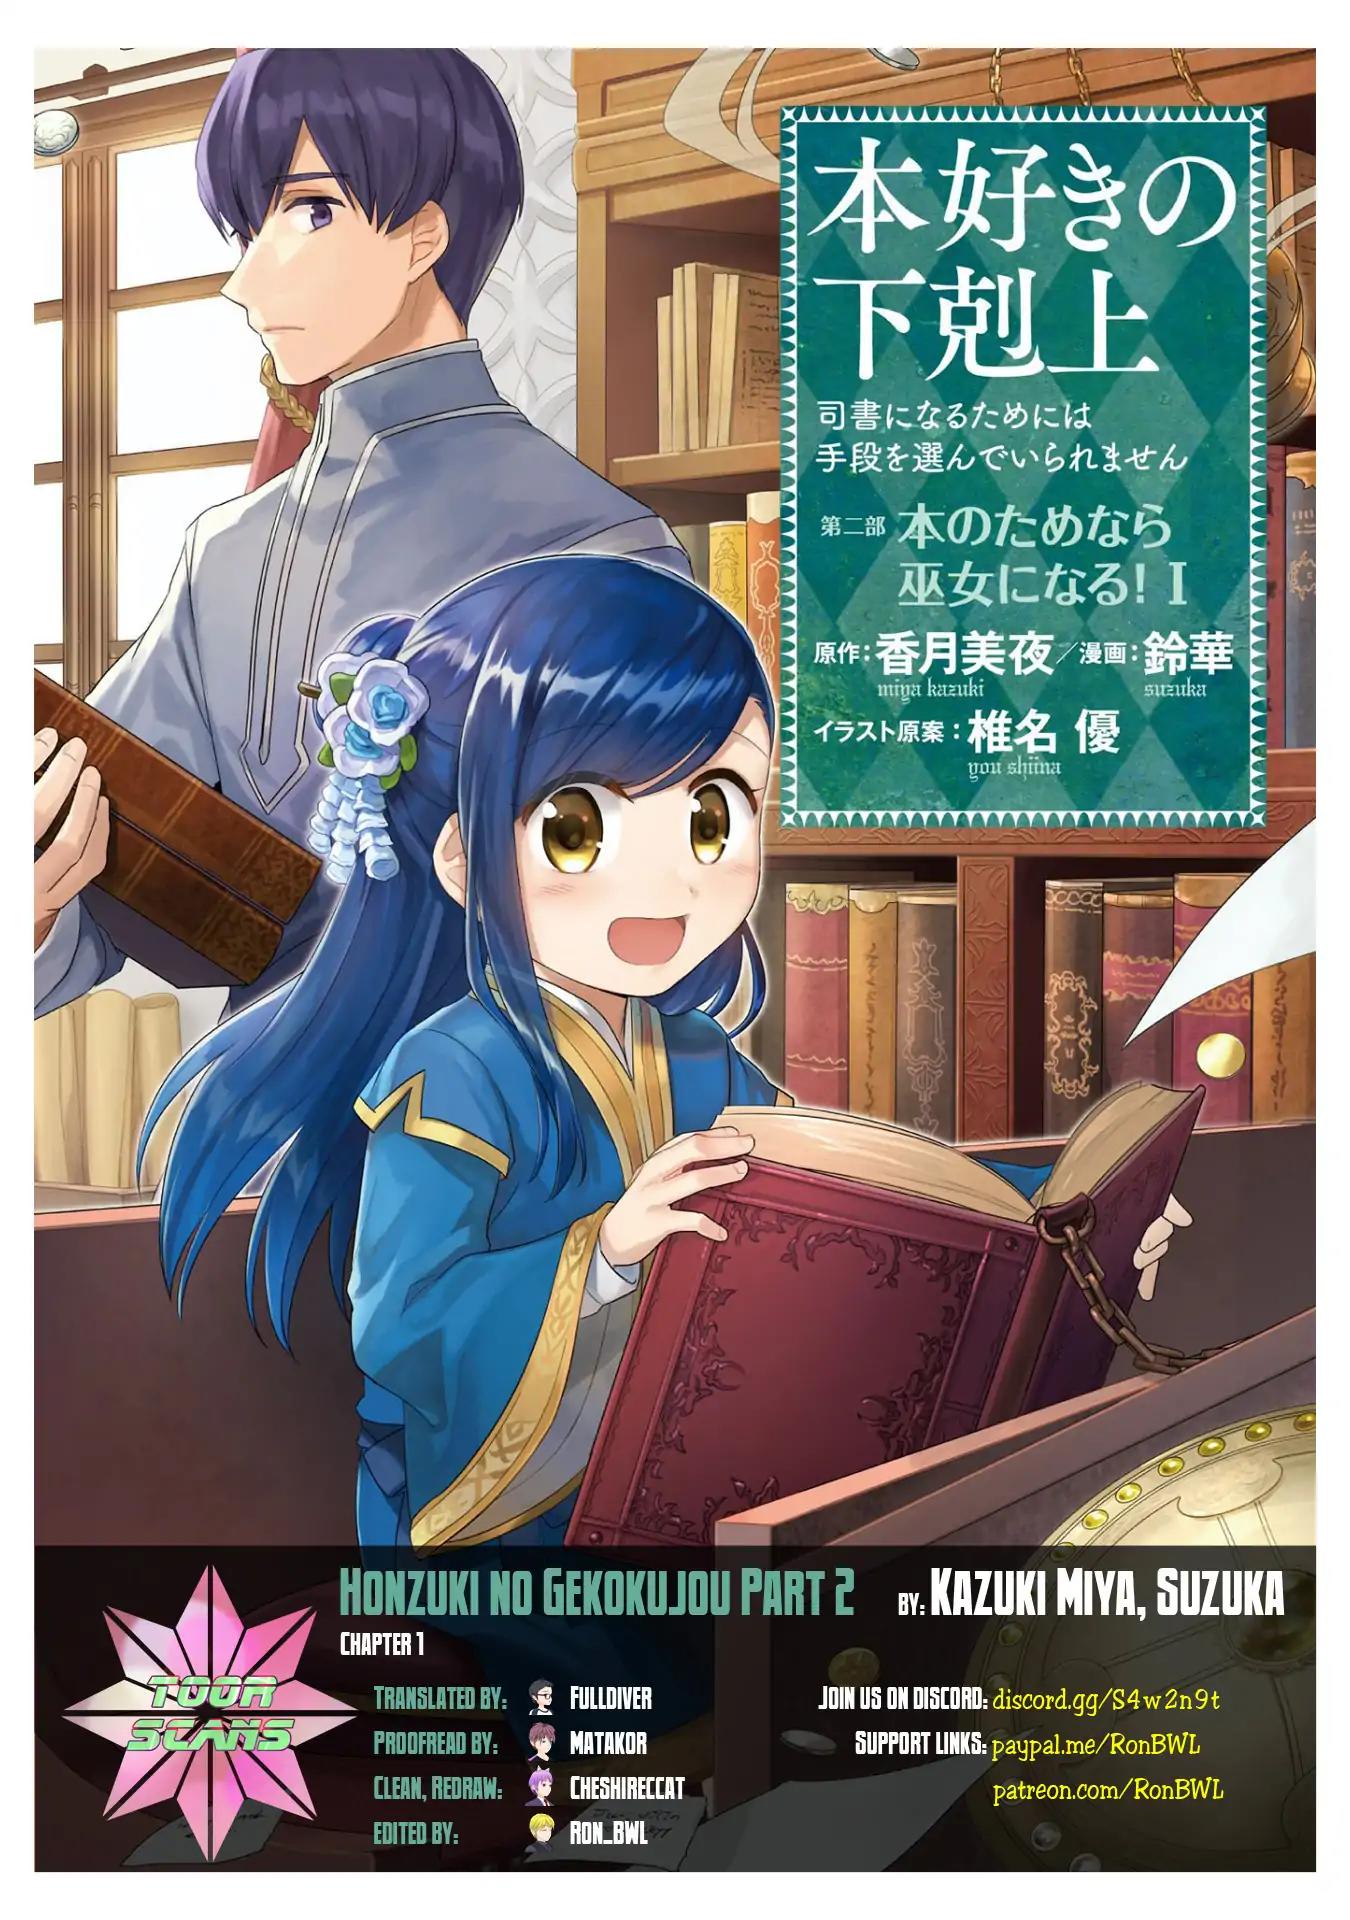 Ascendance of a Bookworm ~I'll Do Anything to Become a Librarian~ Part 2 「I'll Become a Shrine Maiden for Books!」 Vol.1 Chapter 1: